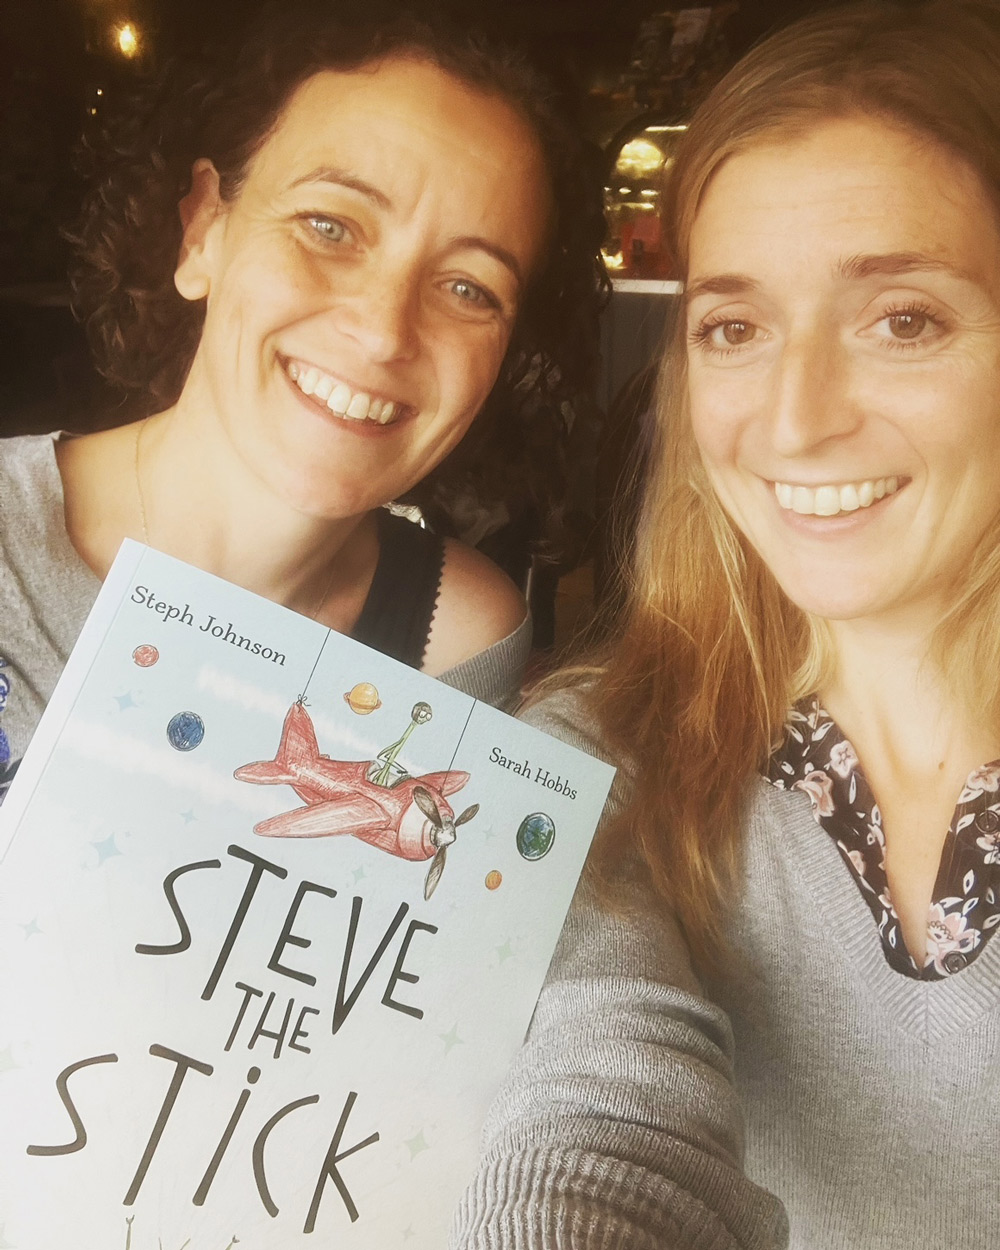 Sarah Hobbs (left) and Steph Johnson (right) hold a copy of Steve the Stick